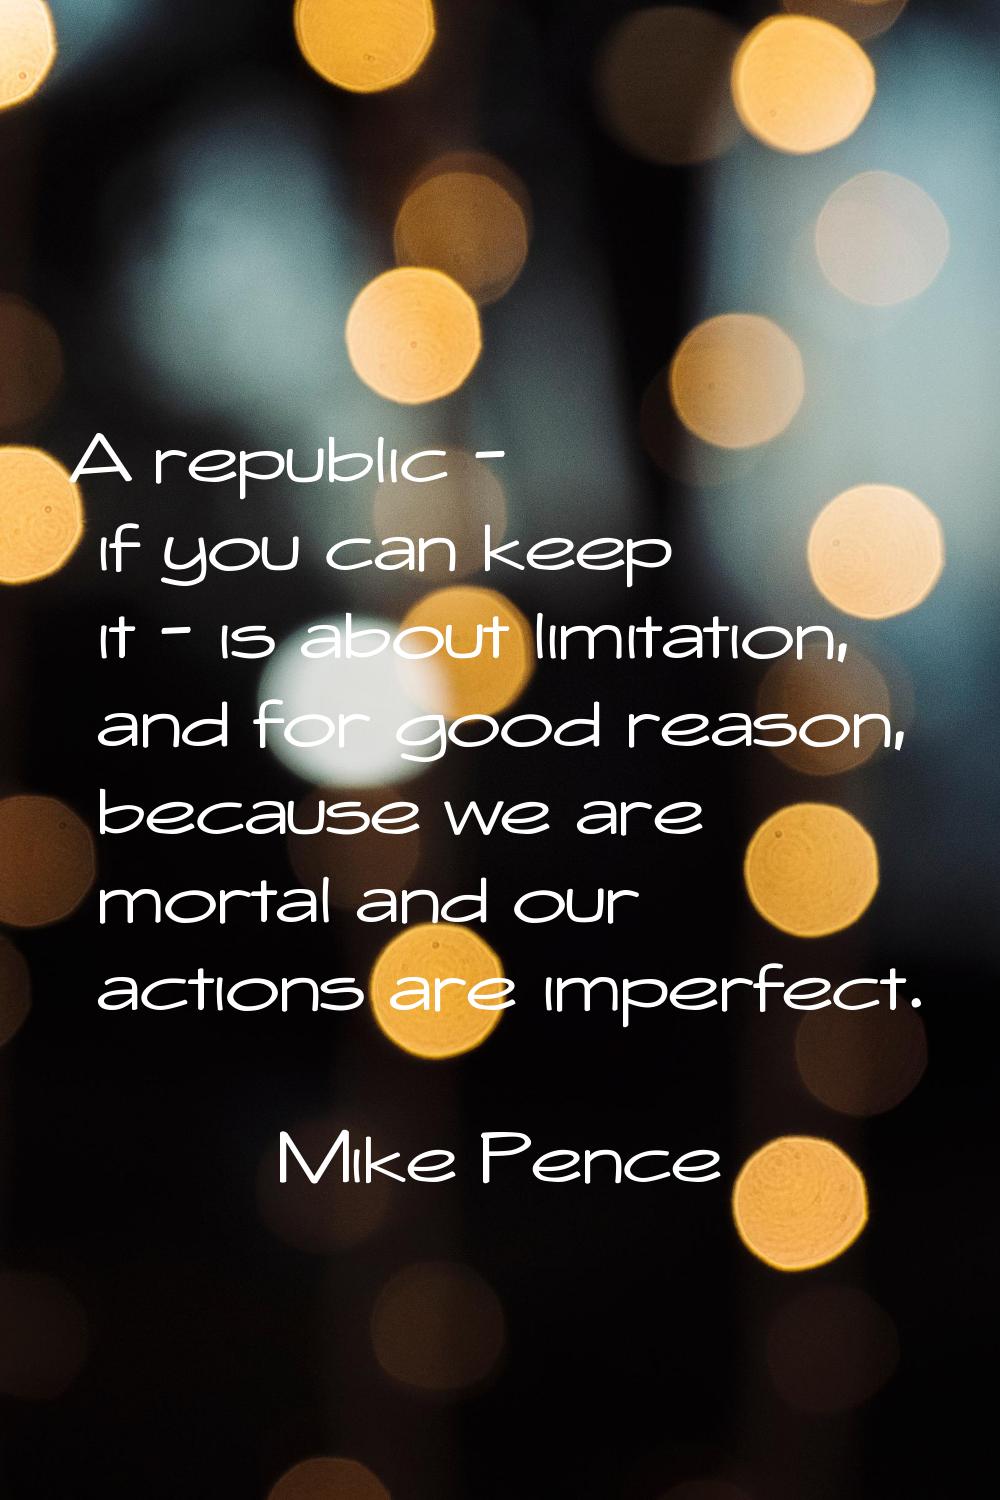 A republic - if you can keep it - is about limitation, and for good reason, because we are mortal a